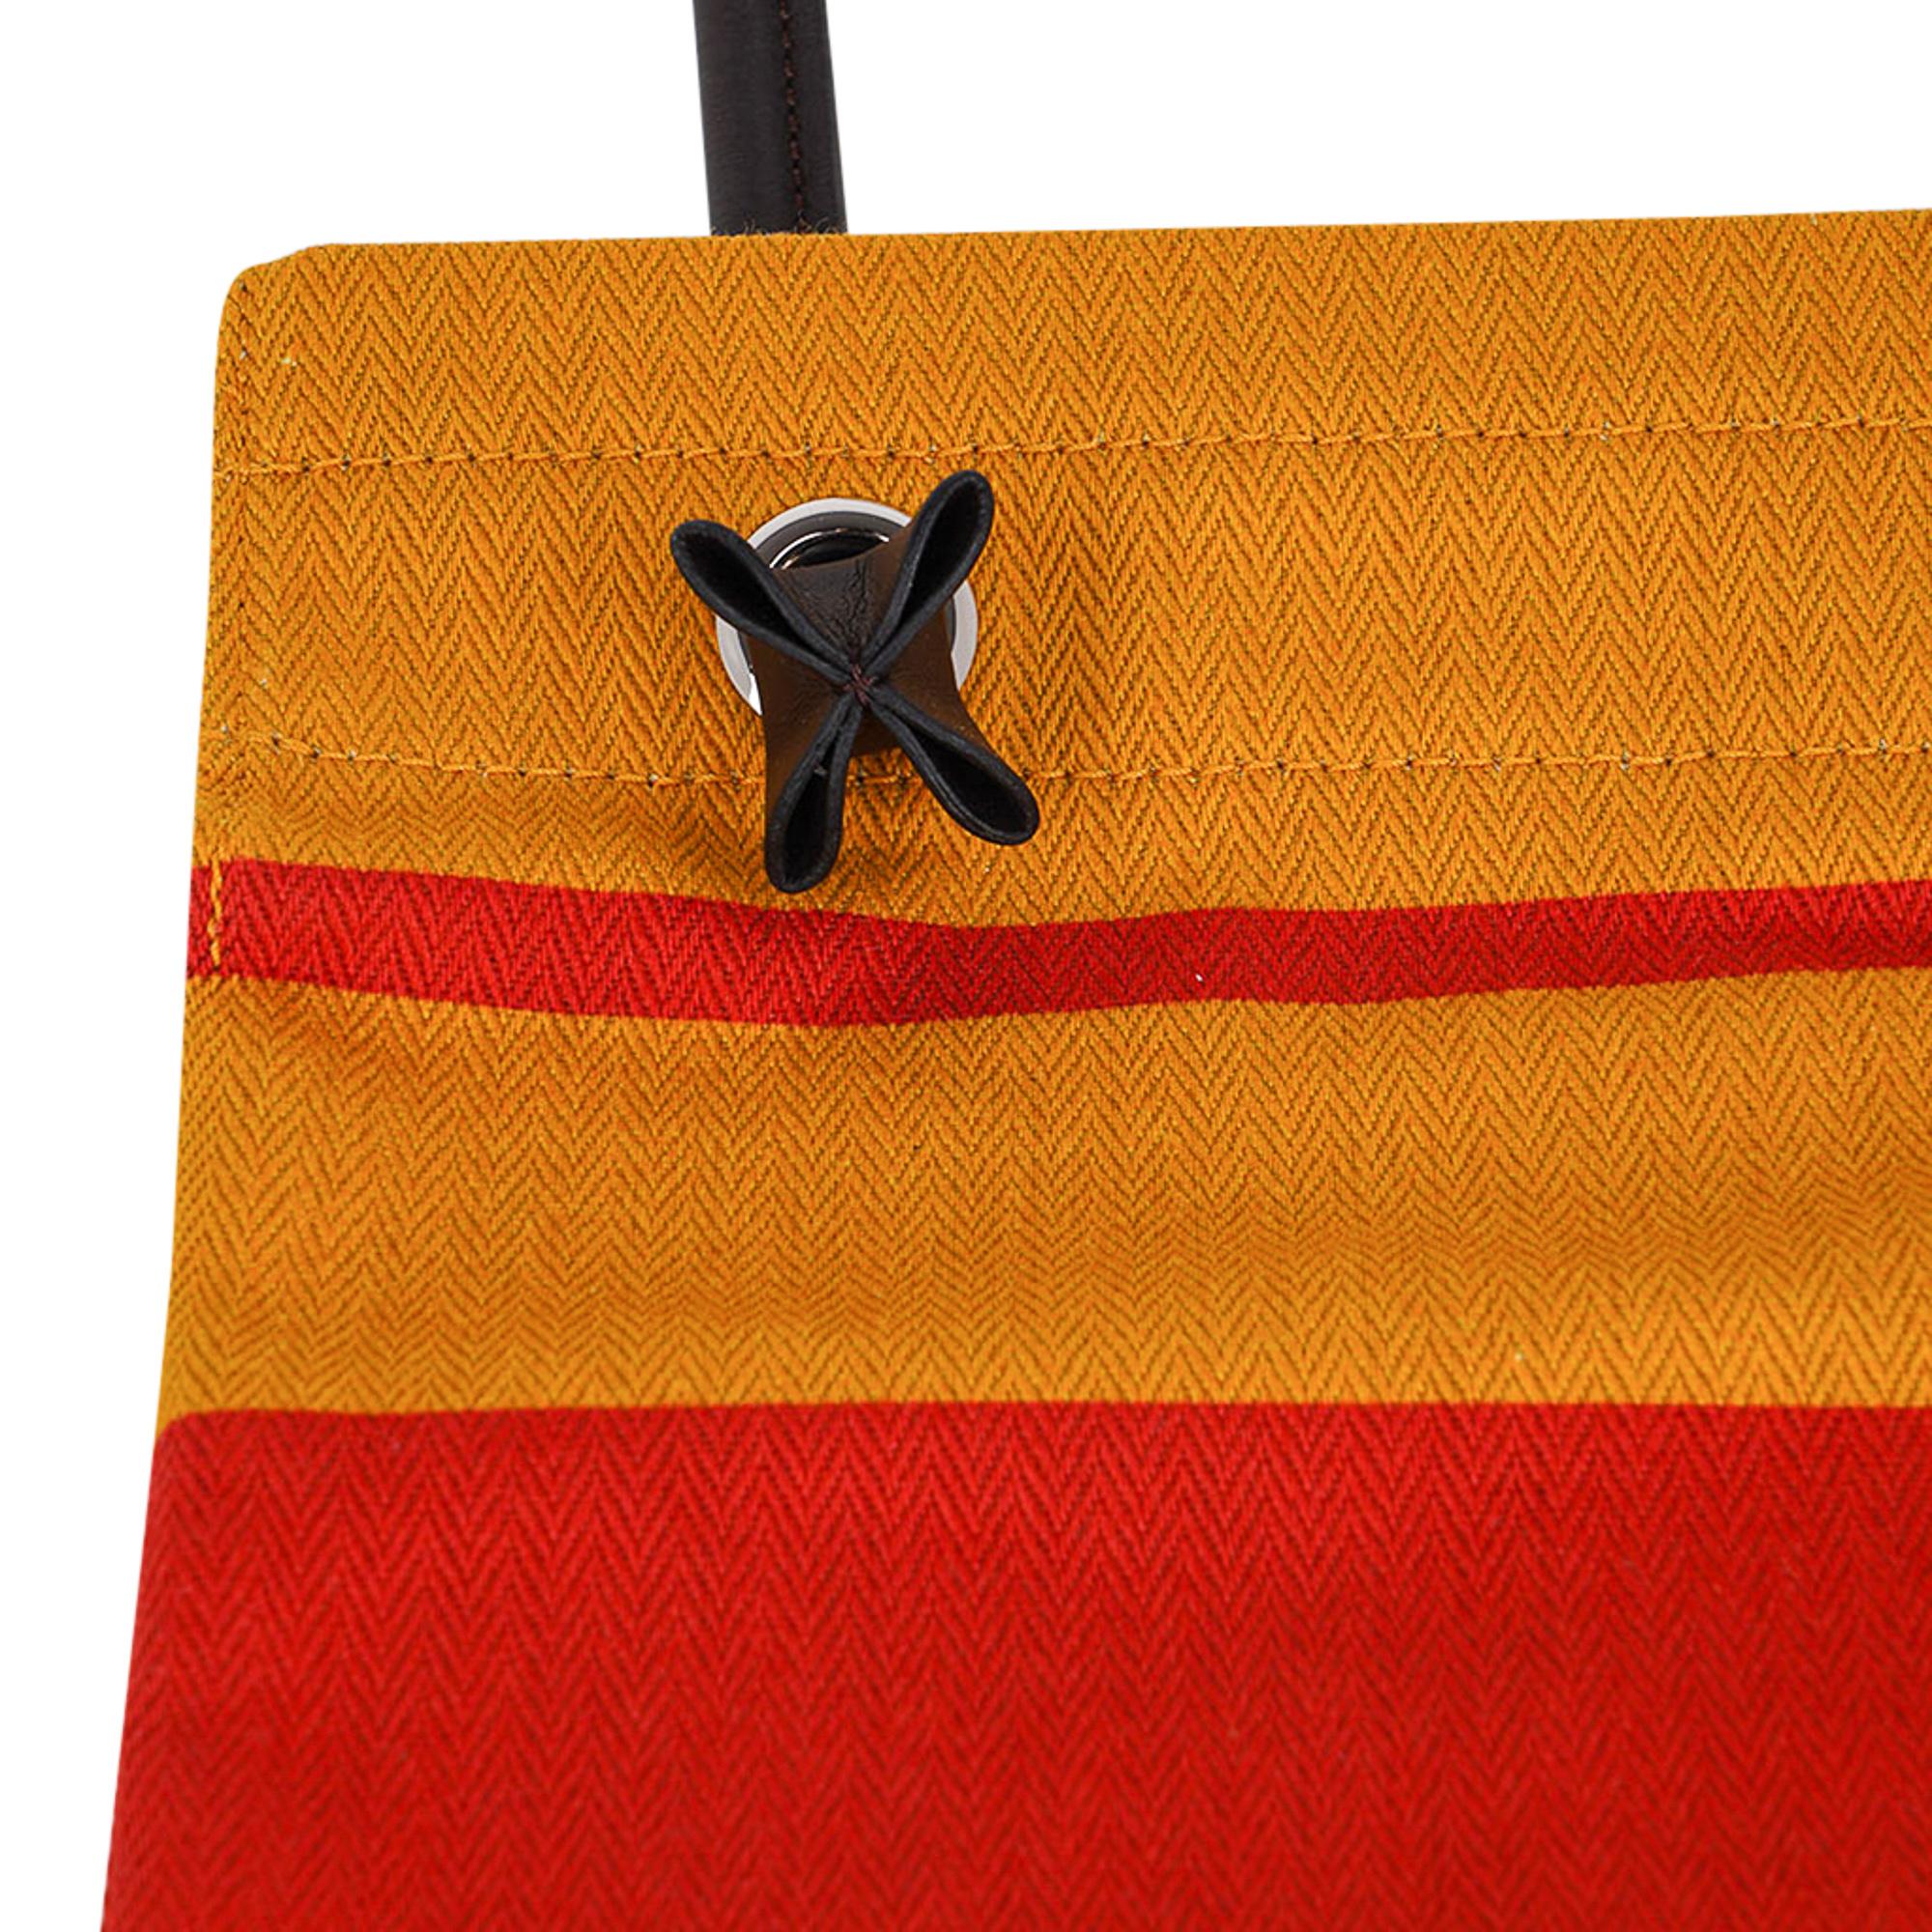 Mightychic offers a guaranteed authentic Hermes Aline featured in Rocabar Herringbone canvas.
The Rocabar colors are Ochre, Coral and Navy.
Ebene Swift leather shoulder strap.
Palladium hardware.
Inspired by the first 1800's racehorse blankets.
Can